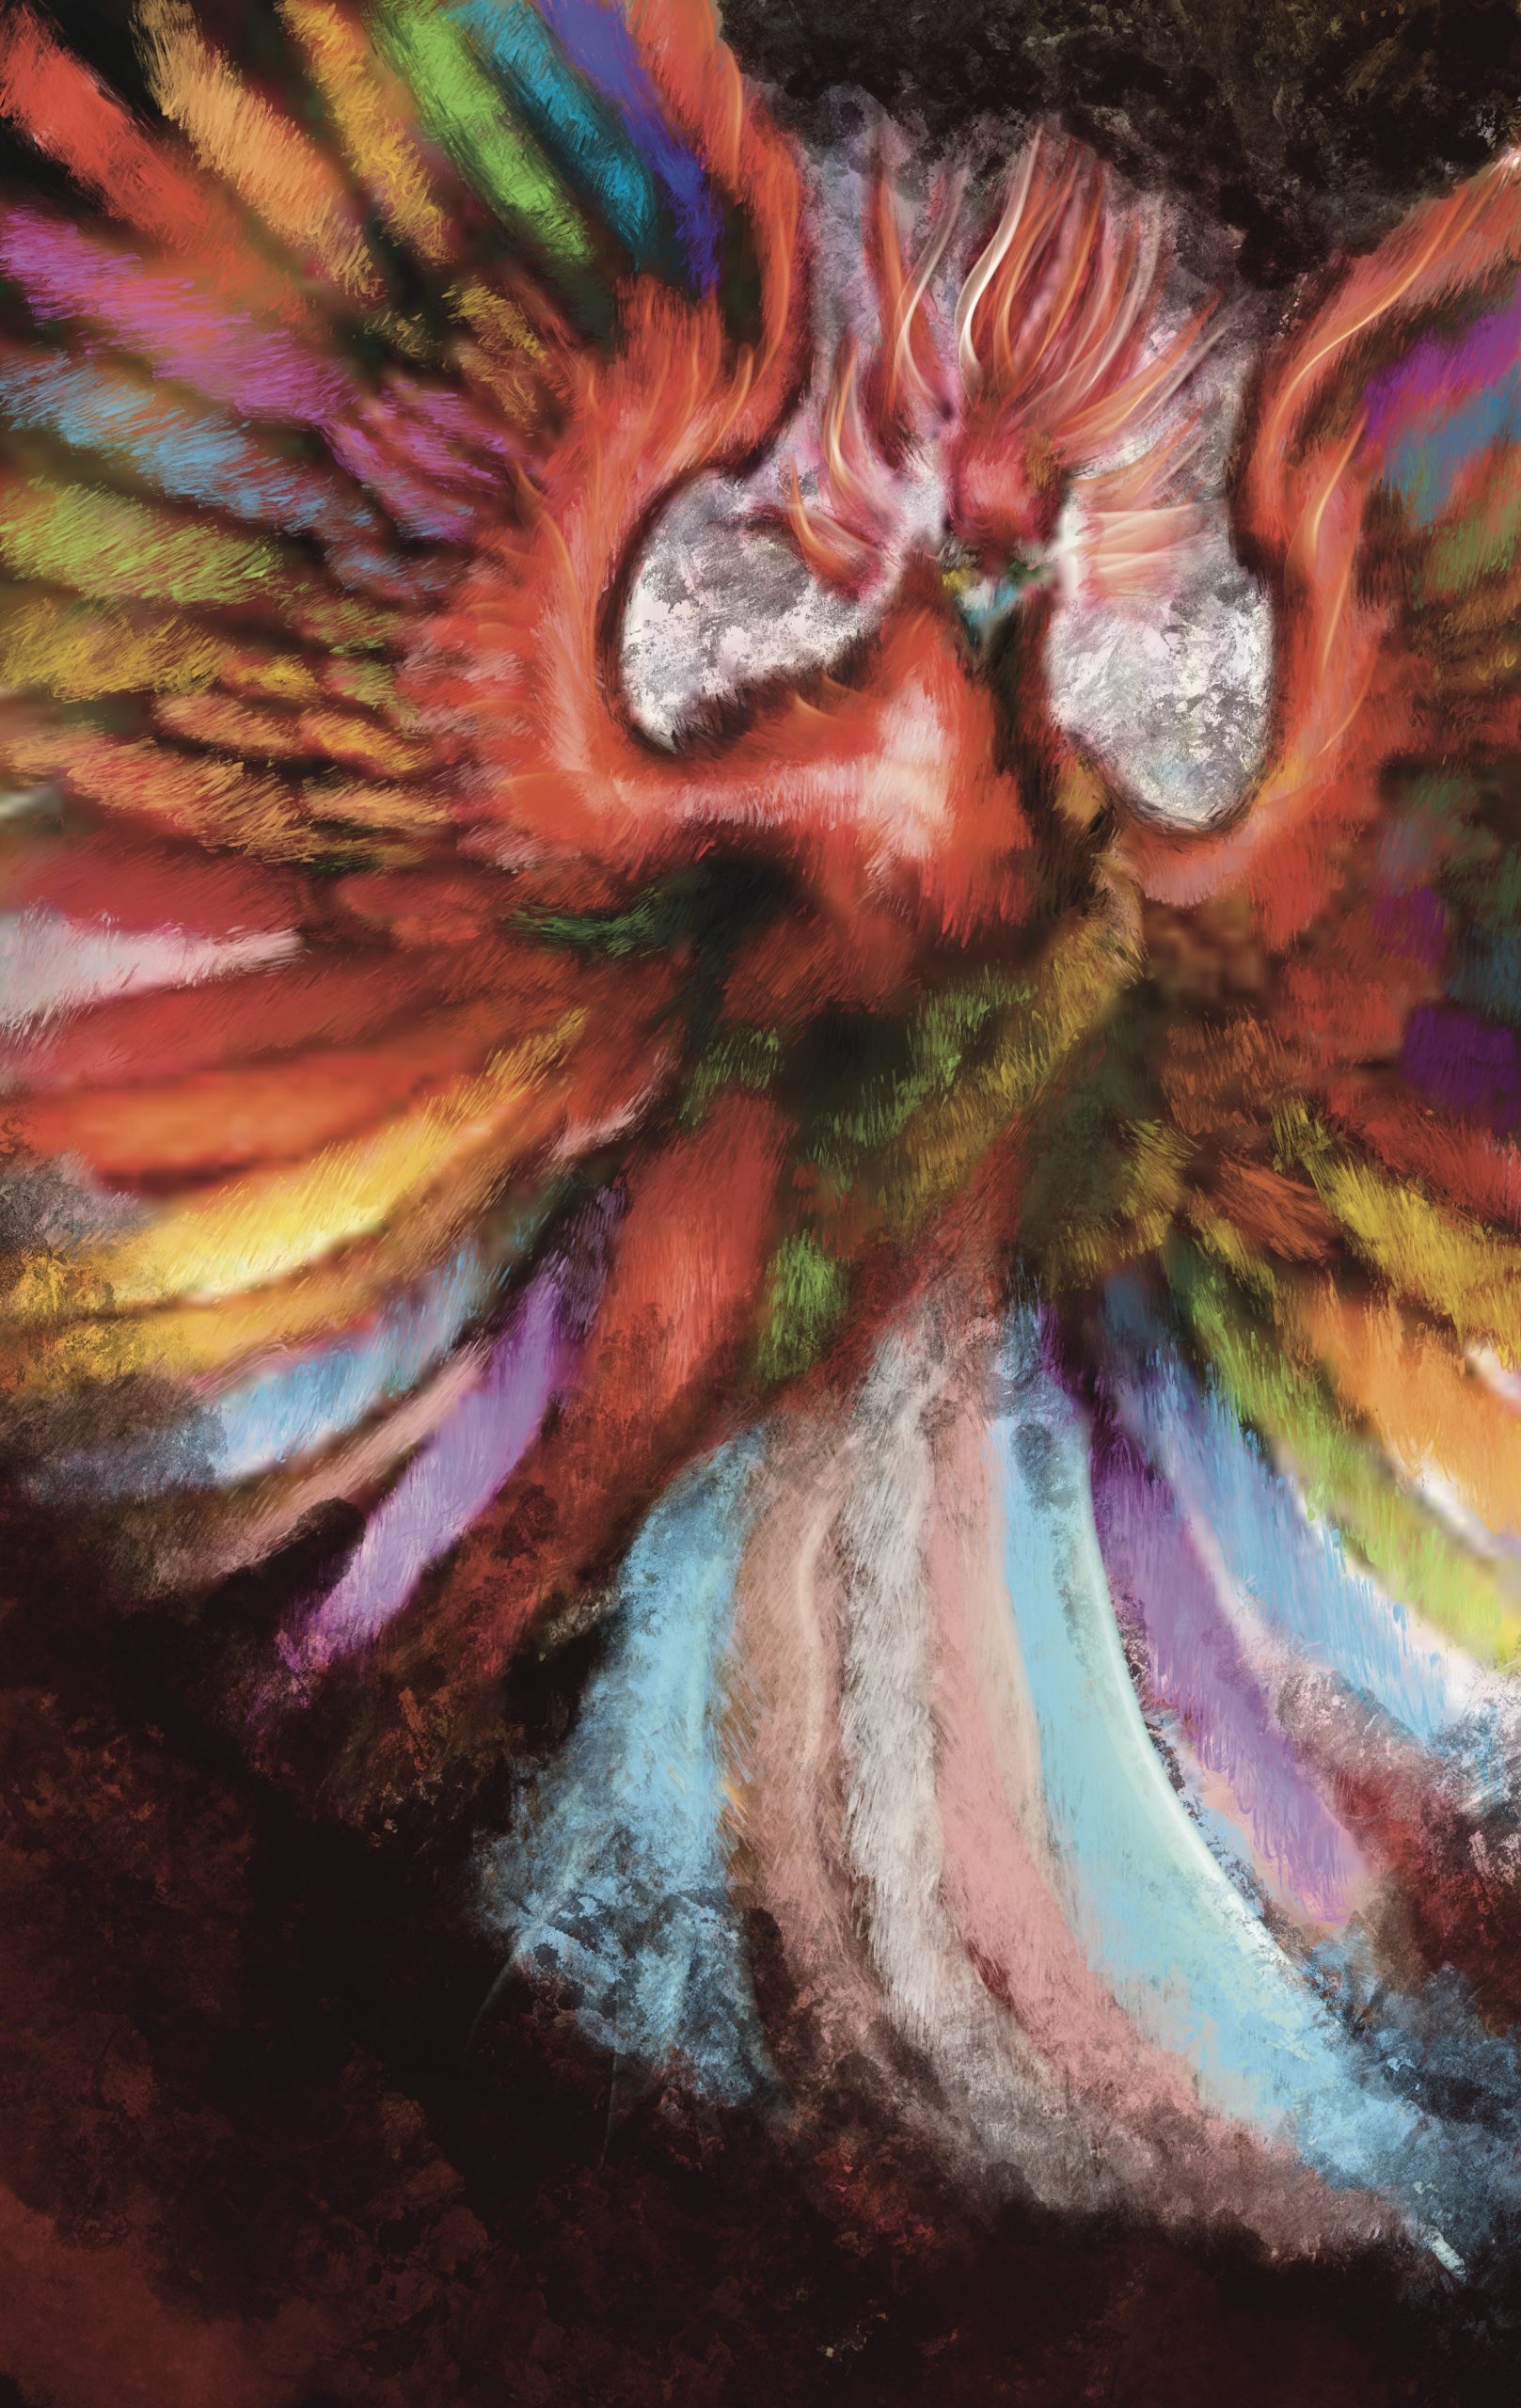 digital painting of a phoenix emerging with a flourish. its feathers are colored with the rainbow and trans pride flags